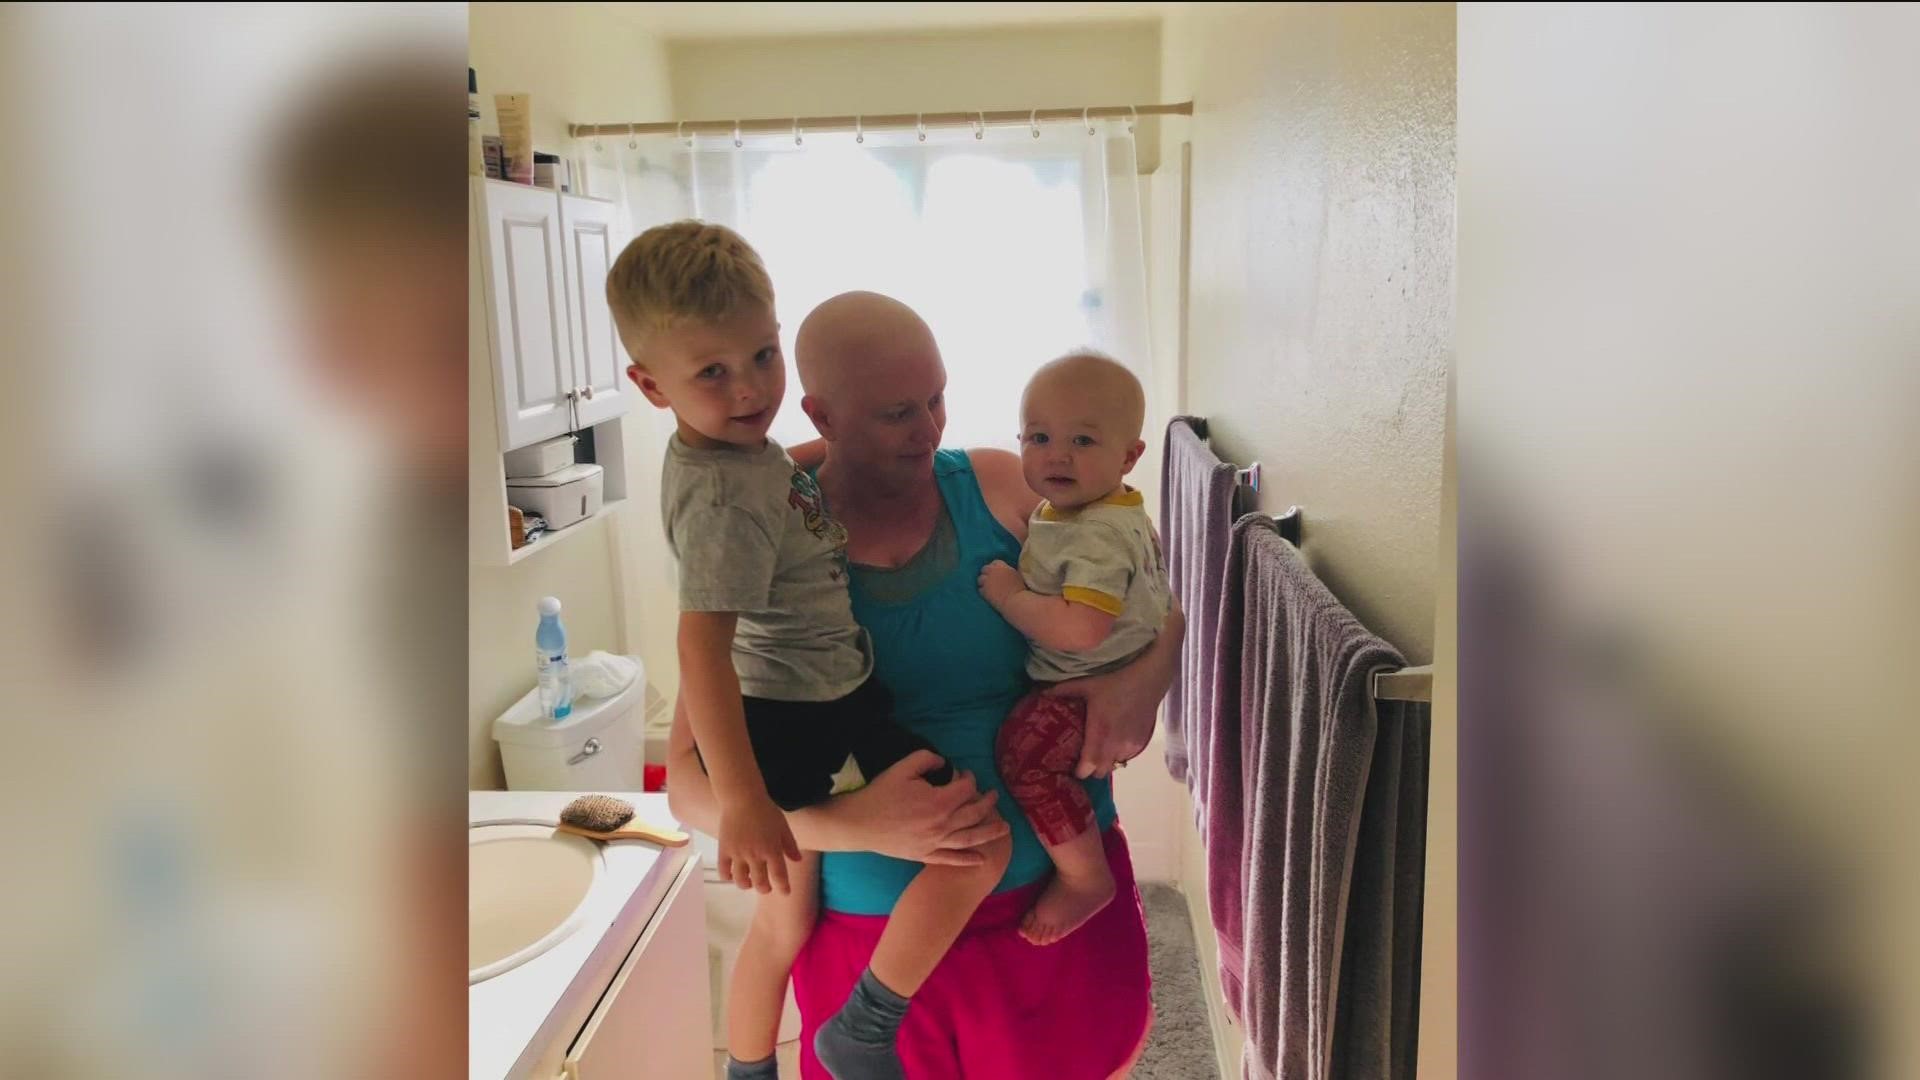 Jenny Giese found a lump in her breast after the birth of her second son. She thought she was too young to have breast cancer, now she is sharing her experience.